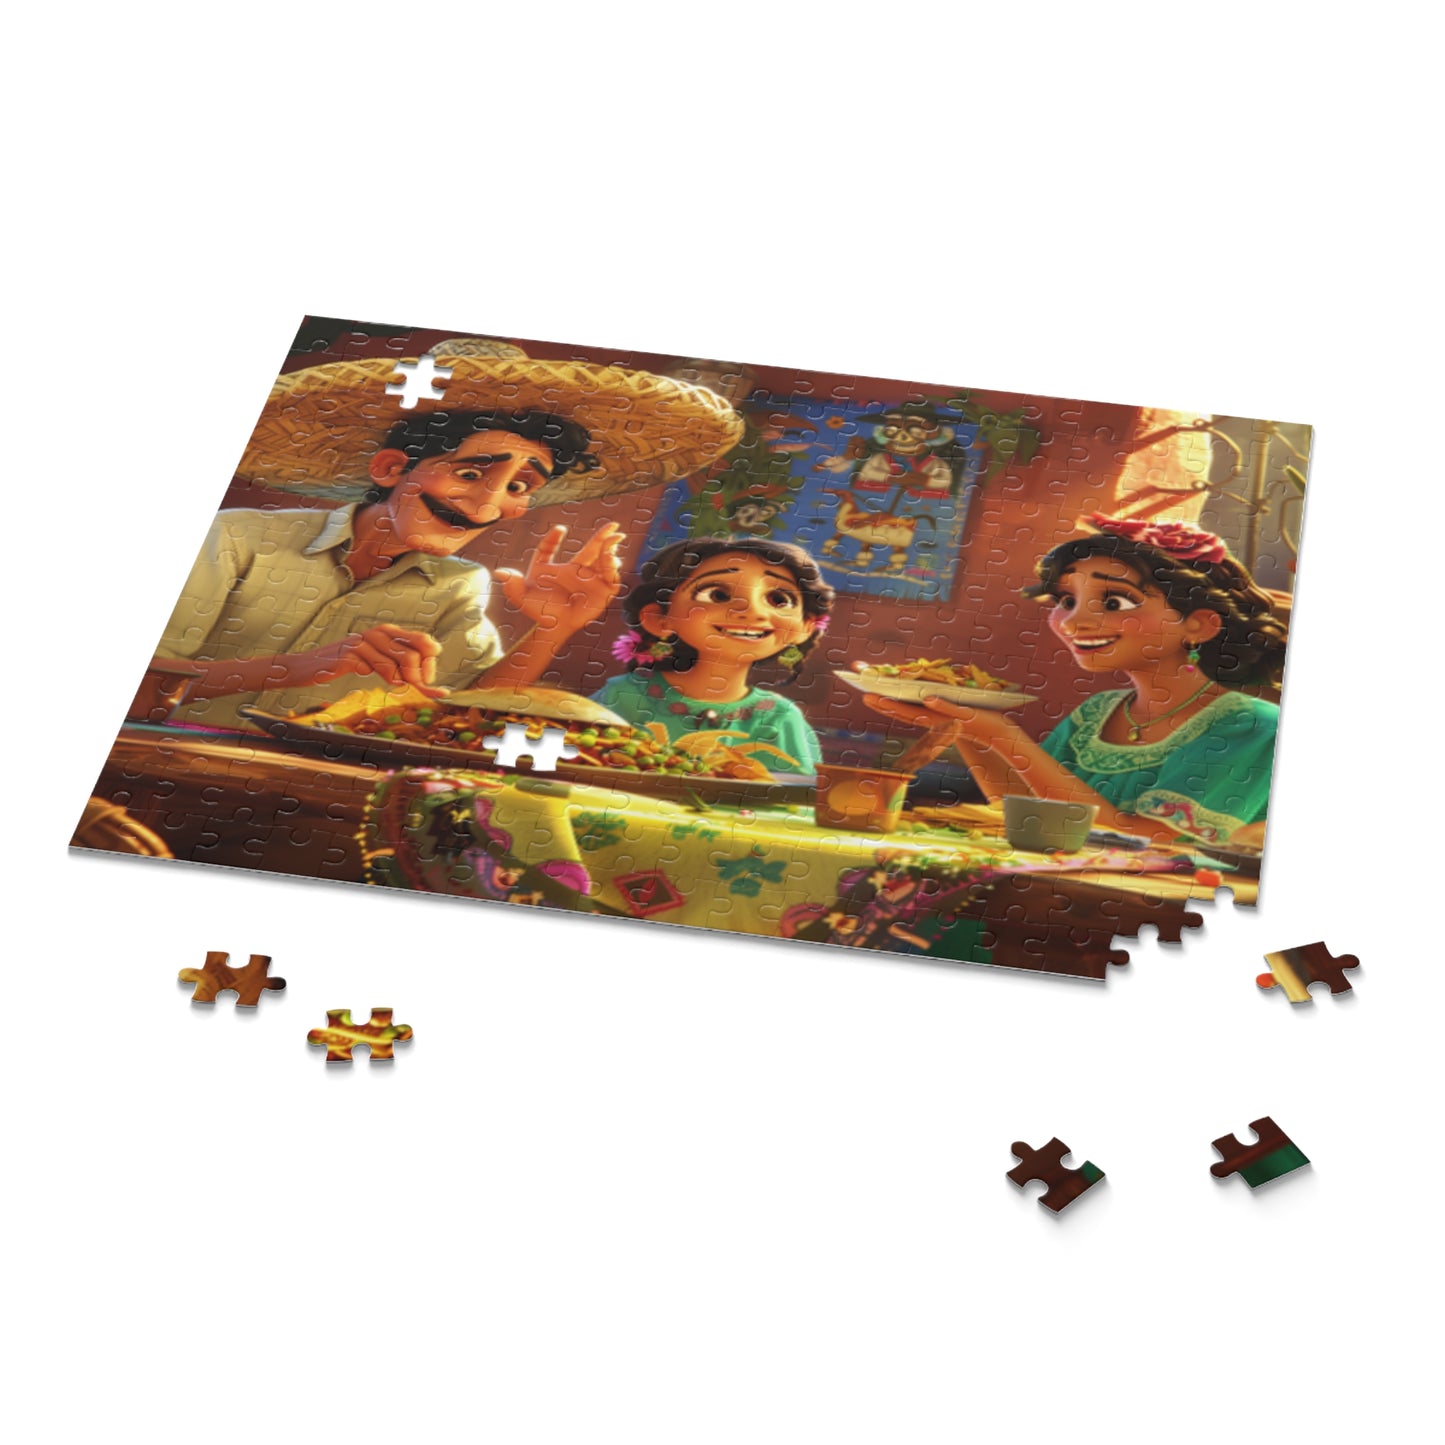 Mexican Happy Family Sitting Retro Art Jigsaw Puzzle Adult Birthday Business Jigsaw Puzzle Gift for Him Funny Humorous Indoor Outdoor Game Gift For Her Online-9